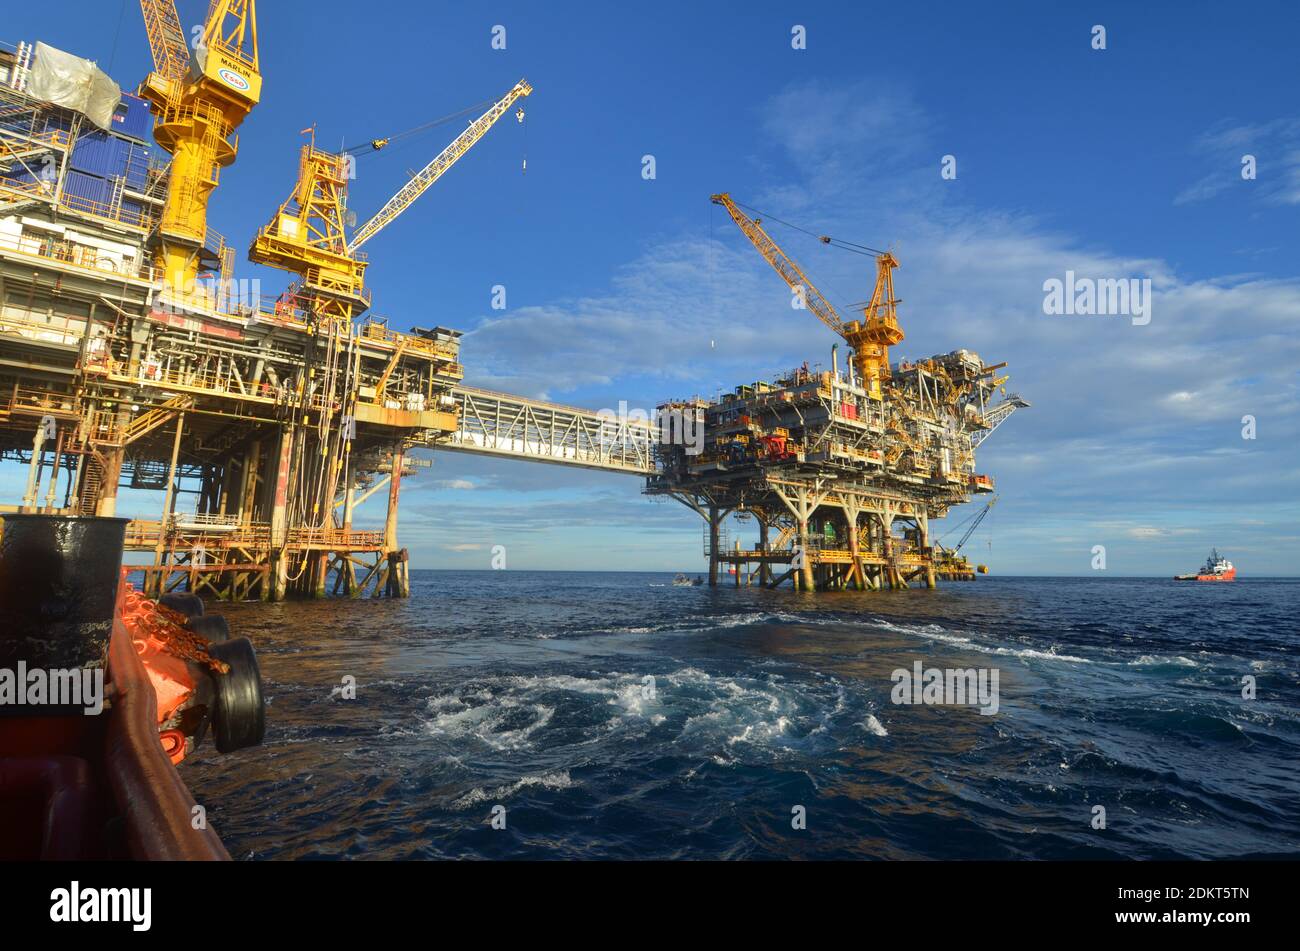 Marlin A and B platforms viewed from a workboat in Bass Strait Victoria Australia. The Oil and gas production rigs were joined by a crossover bridge. Stock Photo